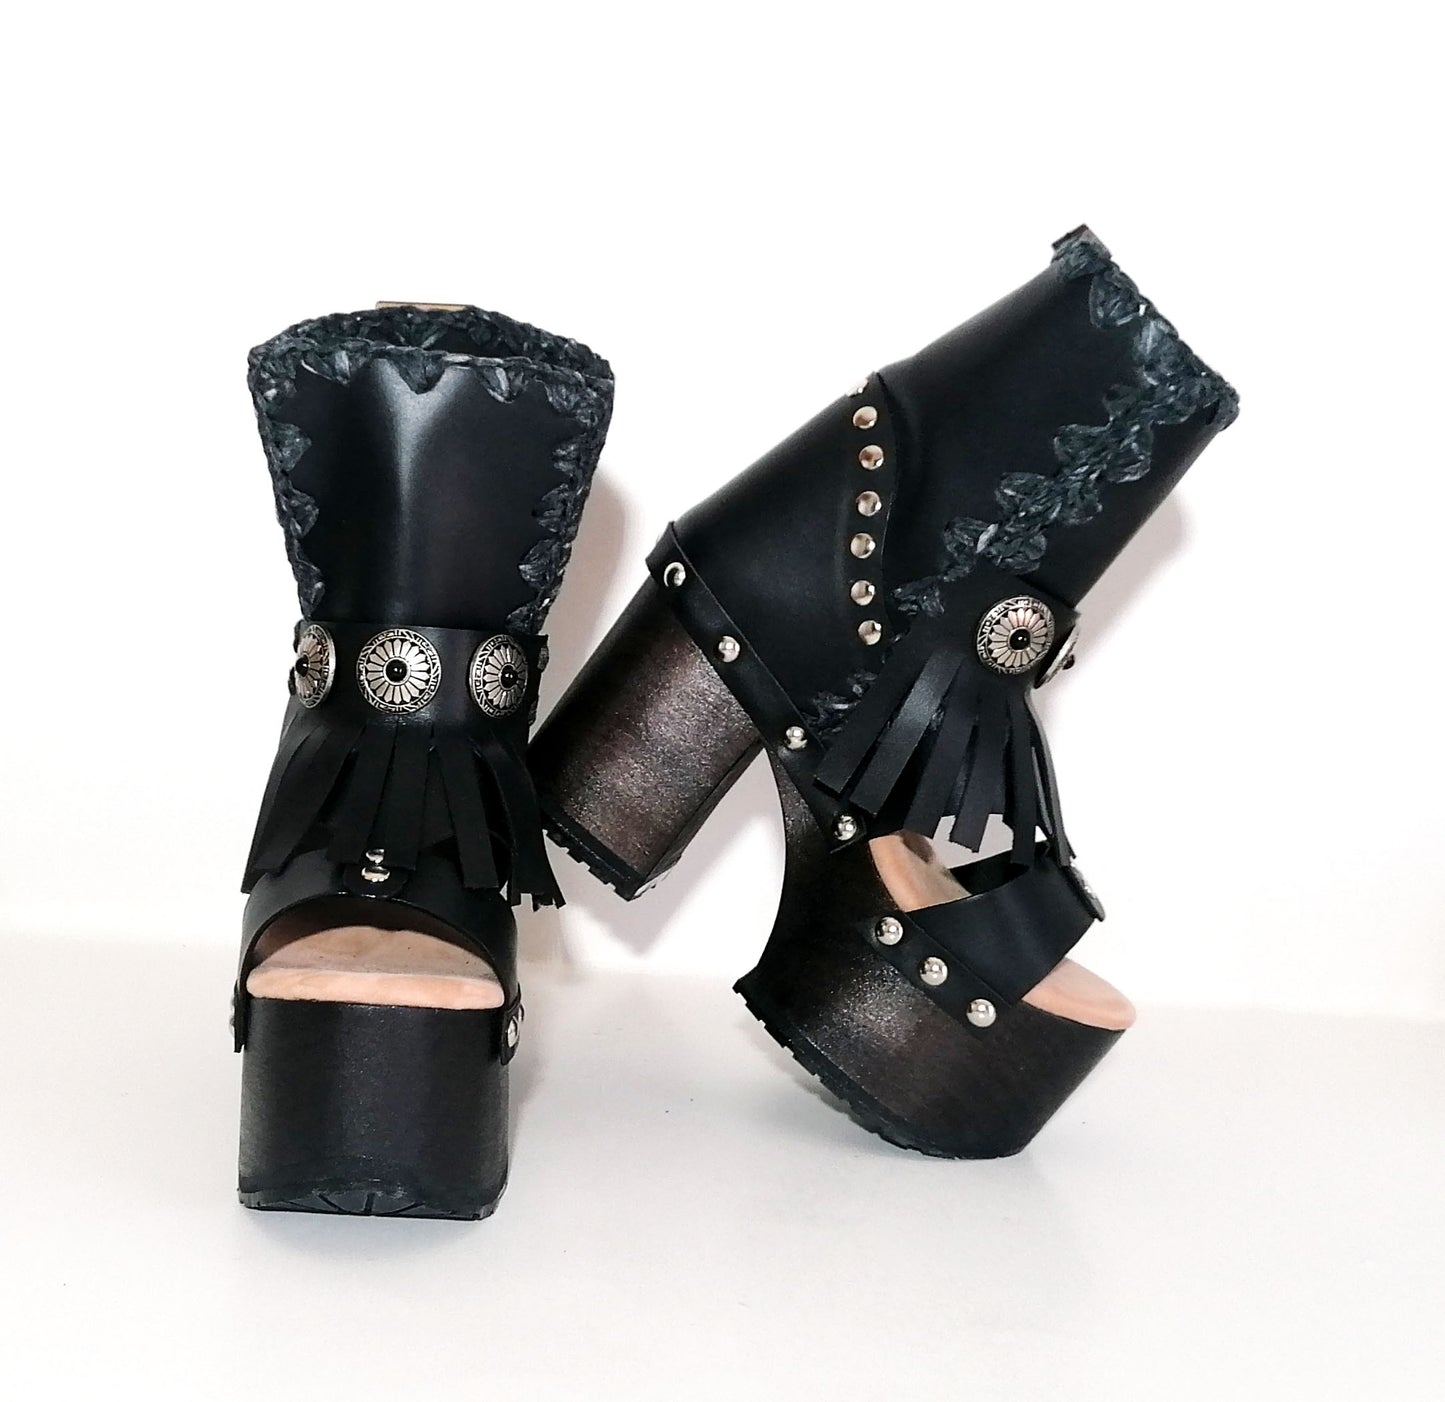 Black leather platform sandal. Leather boot with super high wooden heel. Black leather boot decorated with fringes and silver conchos. Bohemian style boots. Sizes 34 to 47. High quality leather shoes handmade by sol Caleyo. Sustainable fashion.